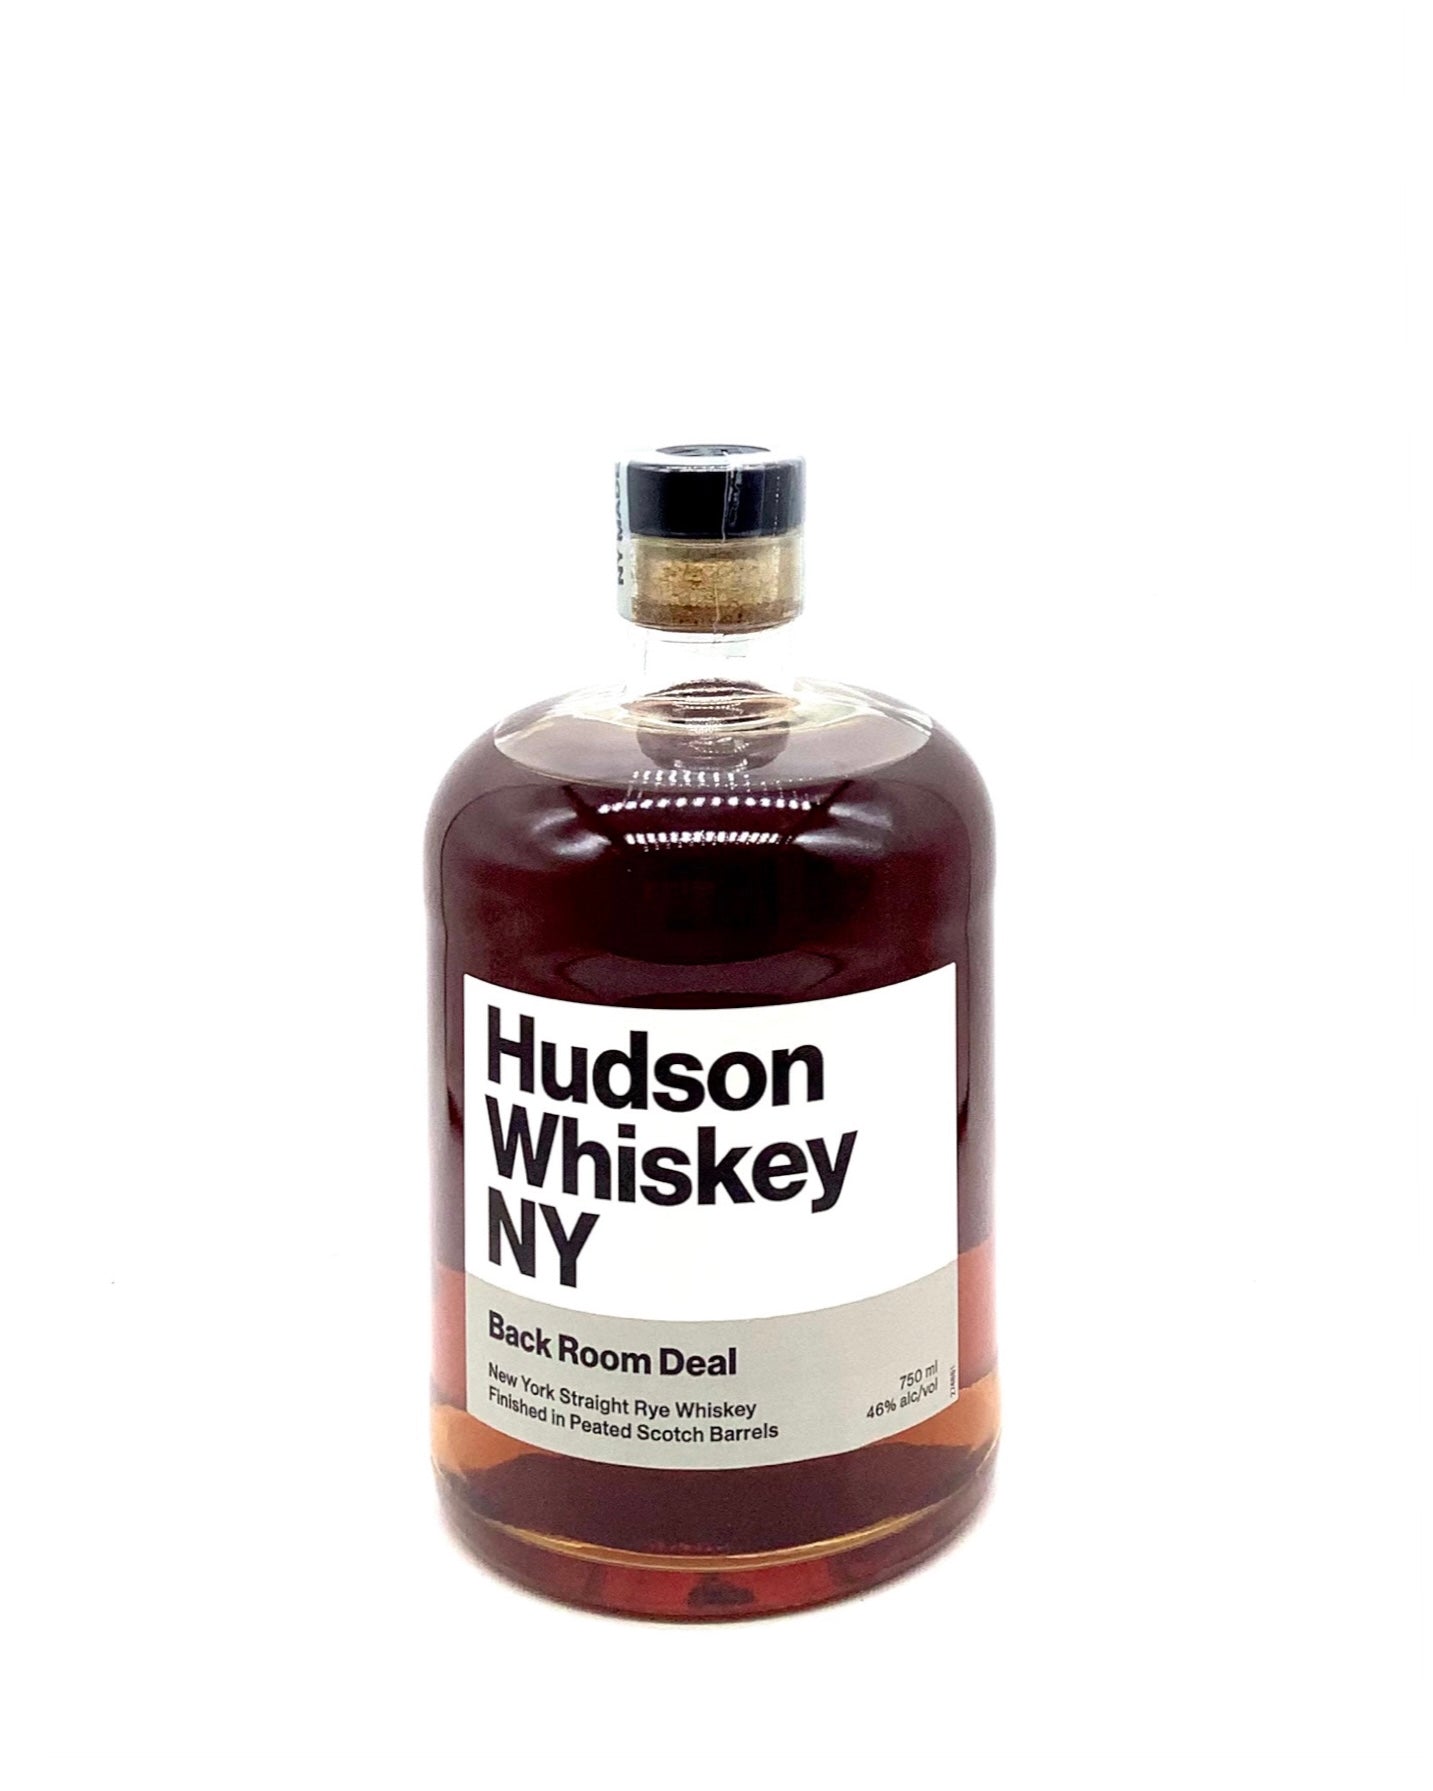 Hudson Whiskey (Tuthilltown Spirits) "Back Room Deal" New York Straight Rye Whiskey Finished In Peated Scotch Barrels 750ml